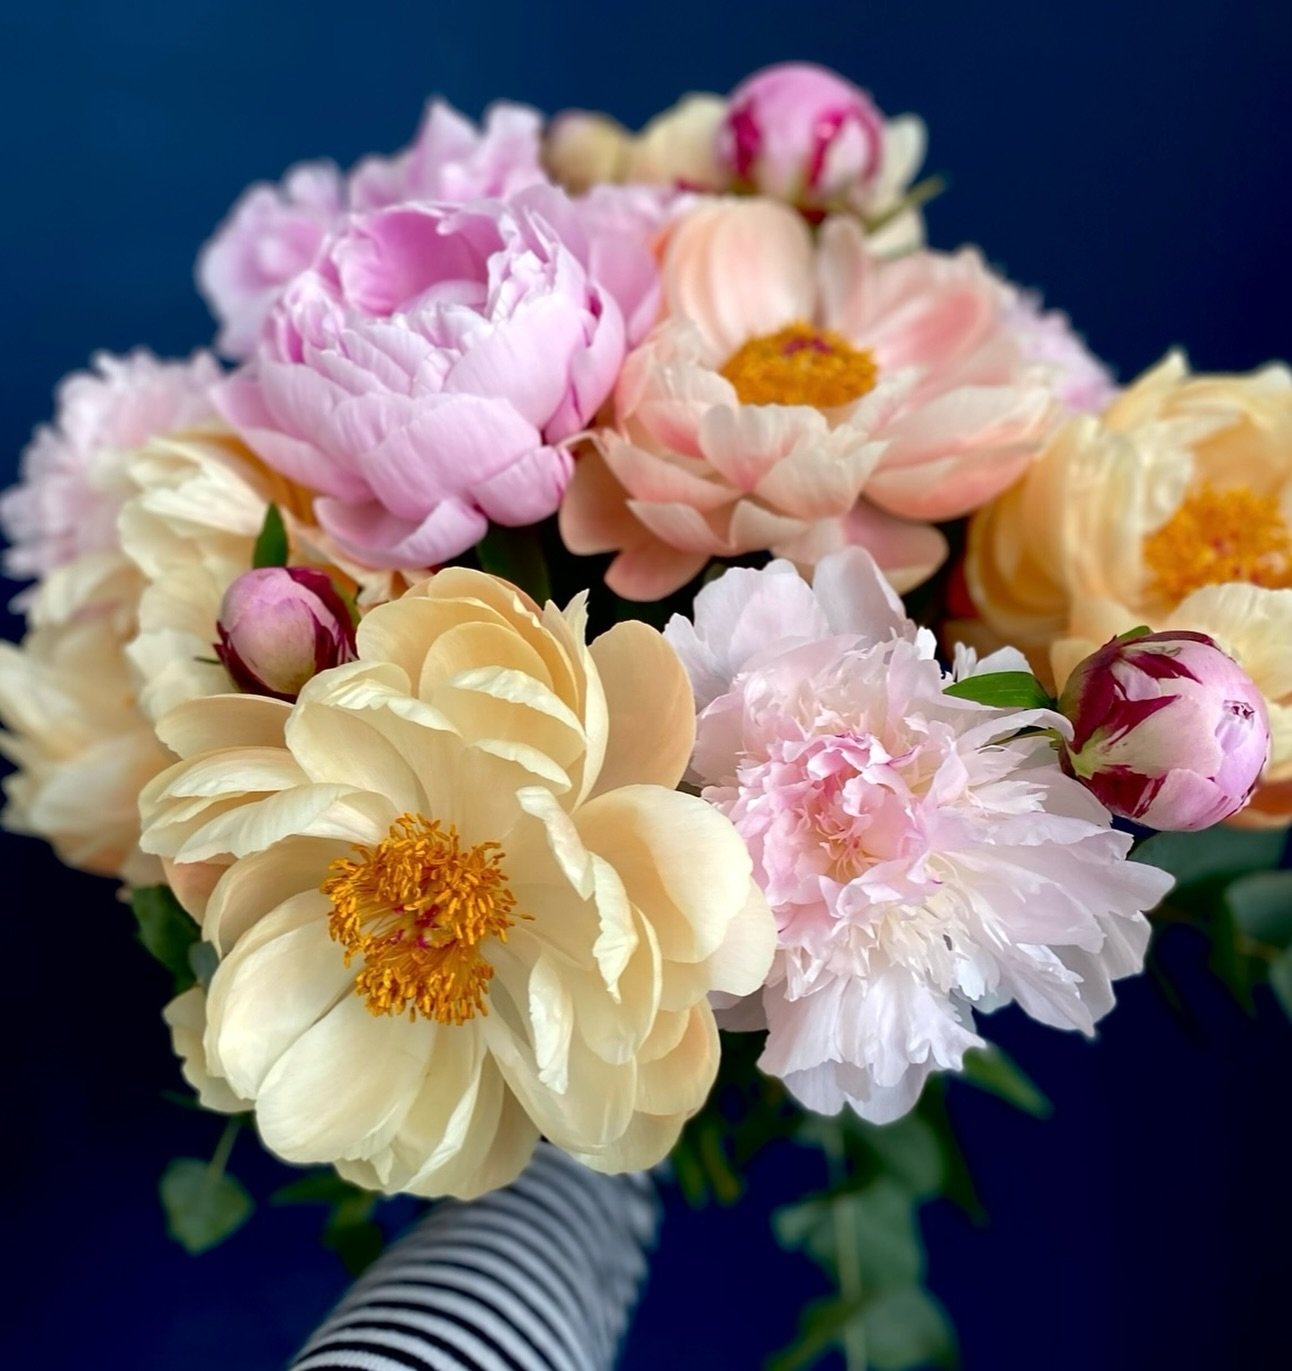 The beauty of peonies. In so much awe of these fluffy beauties. These bloomed from a deep pinky red to orange, then finally to a pale yellow - and the blooms were huuuge!(I&rsquo;ve shown it here in reverse). Just magical&hellip;.

.
.
.
.
.

#peonie